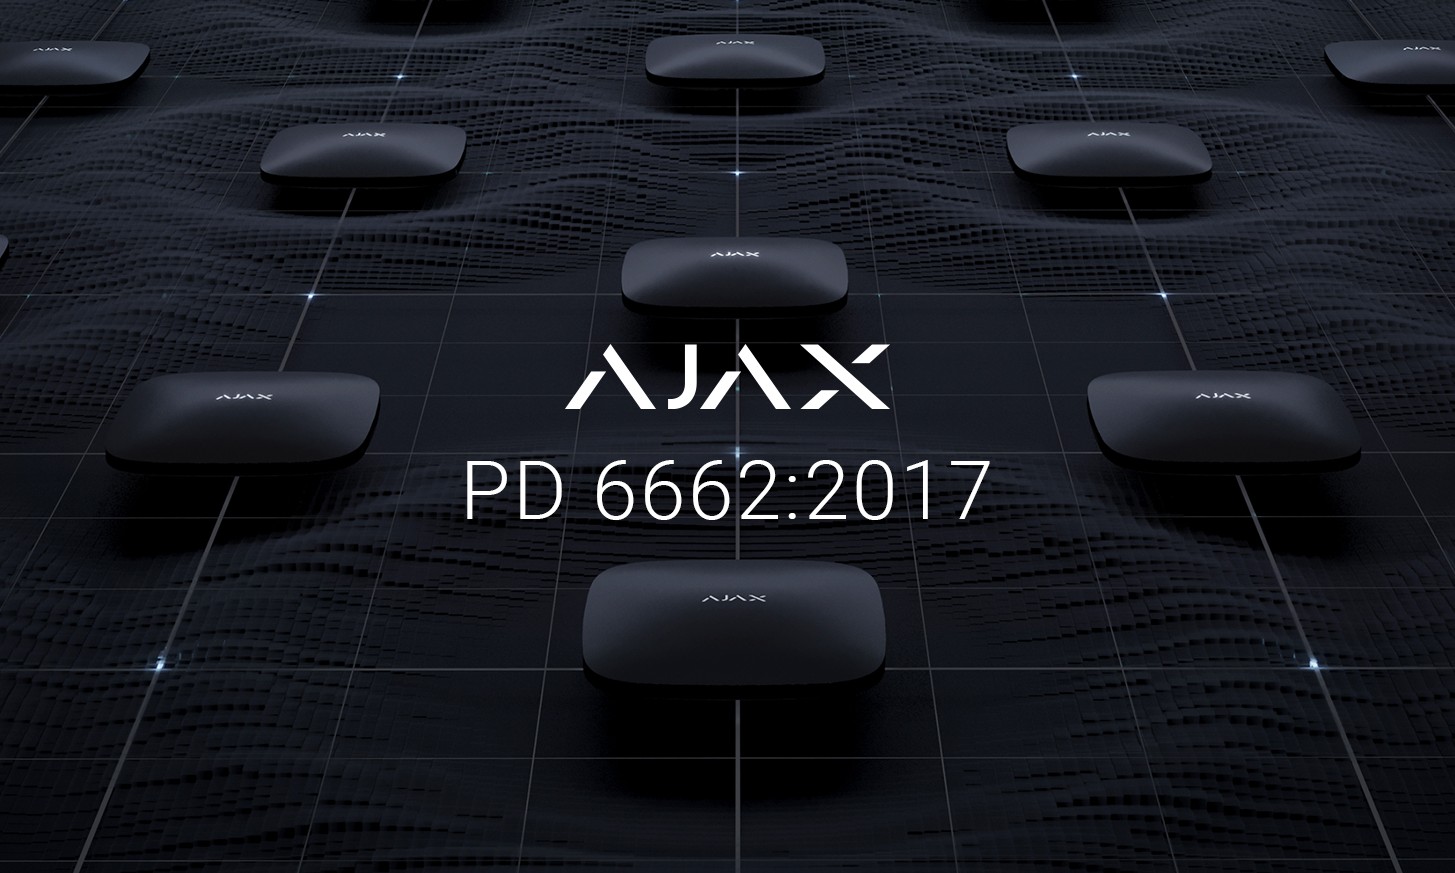 Ajax security system becomes compliant with the PD 6662:2017